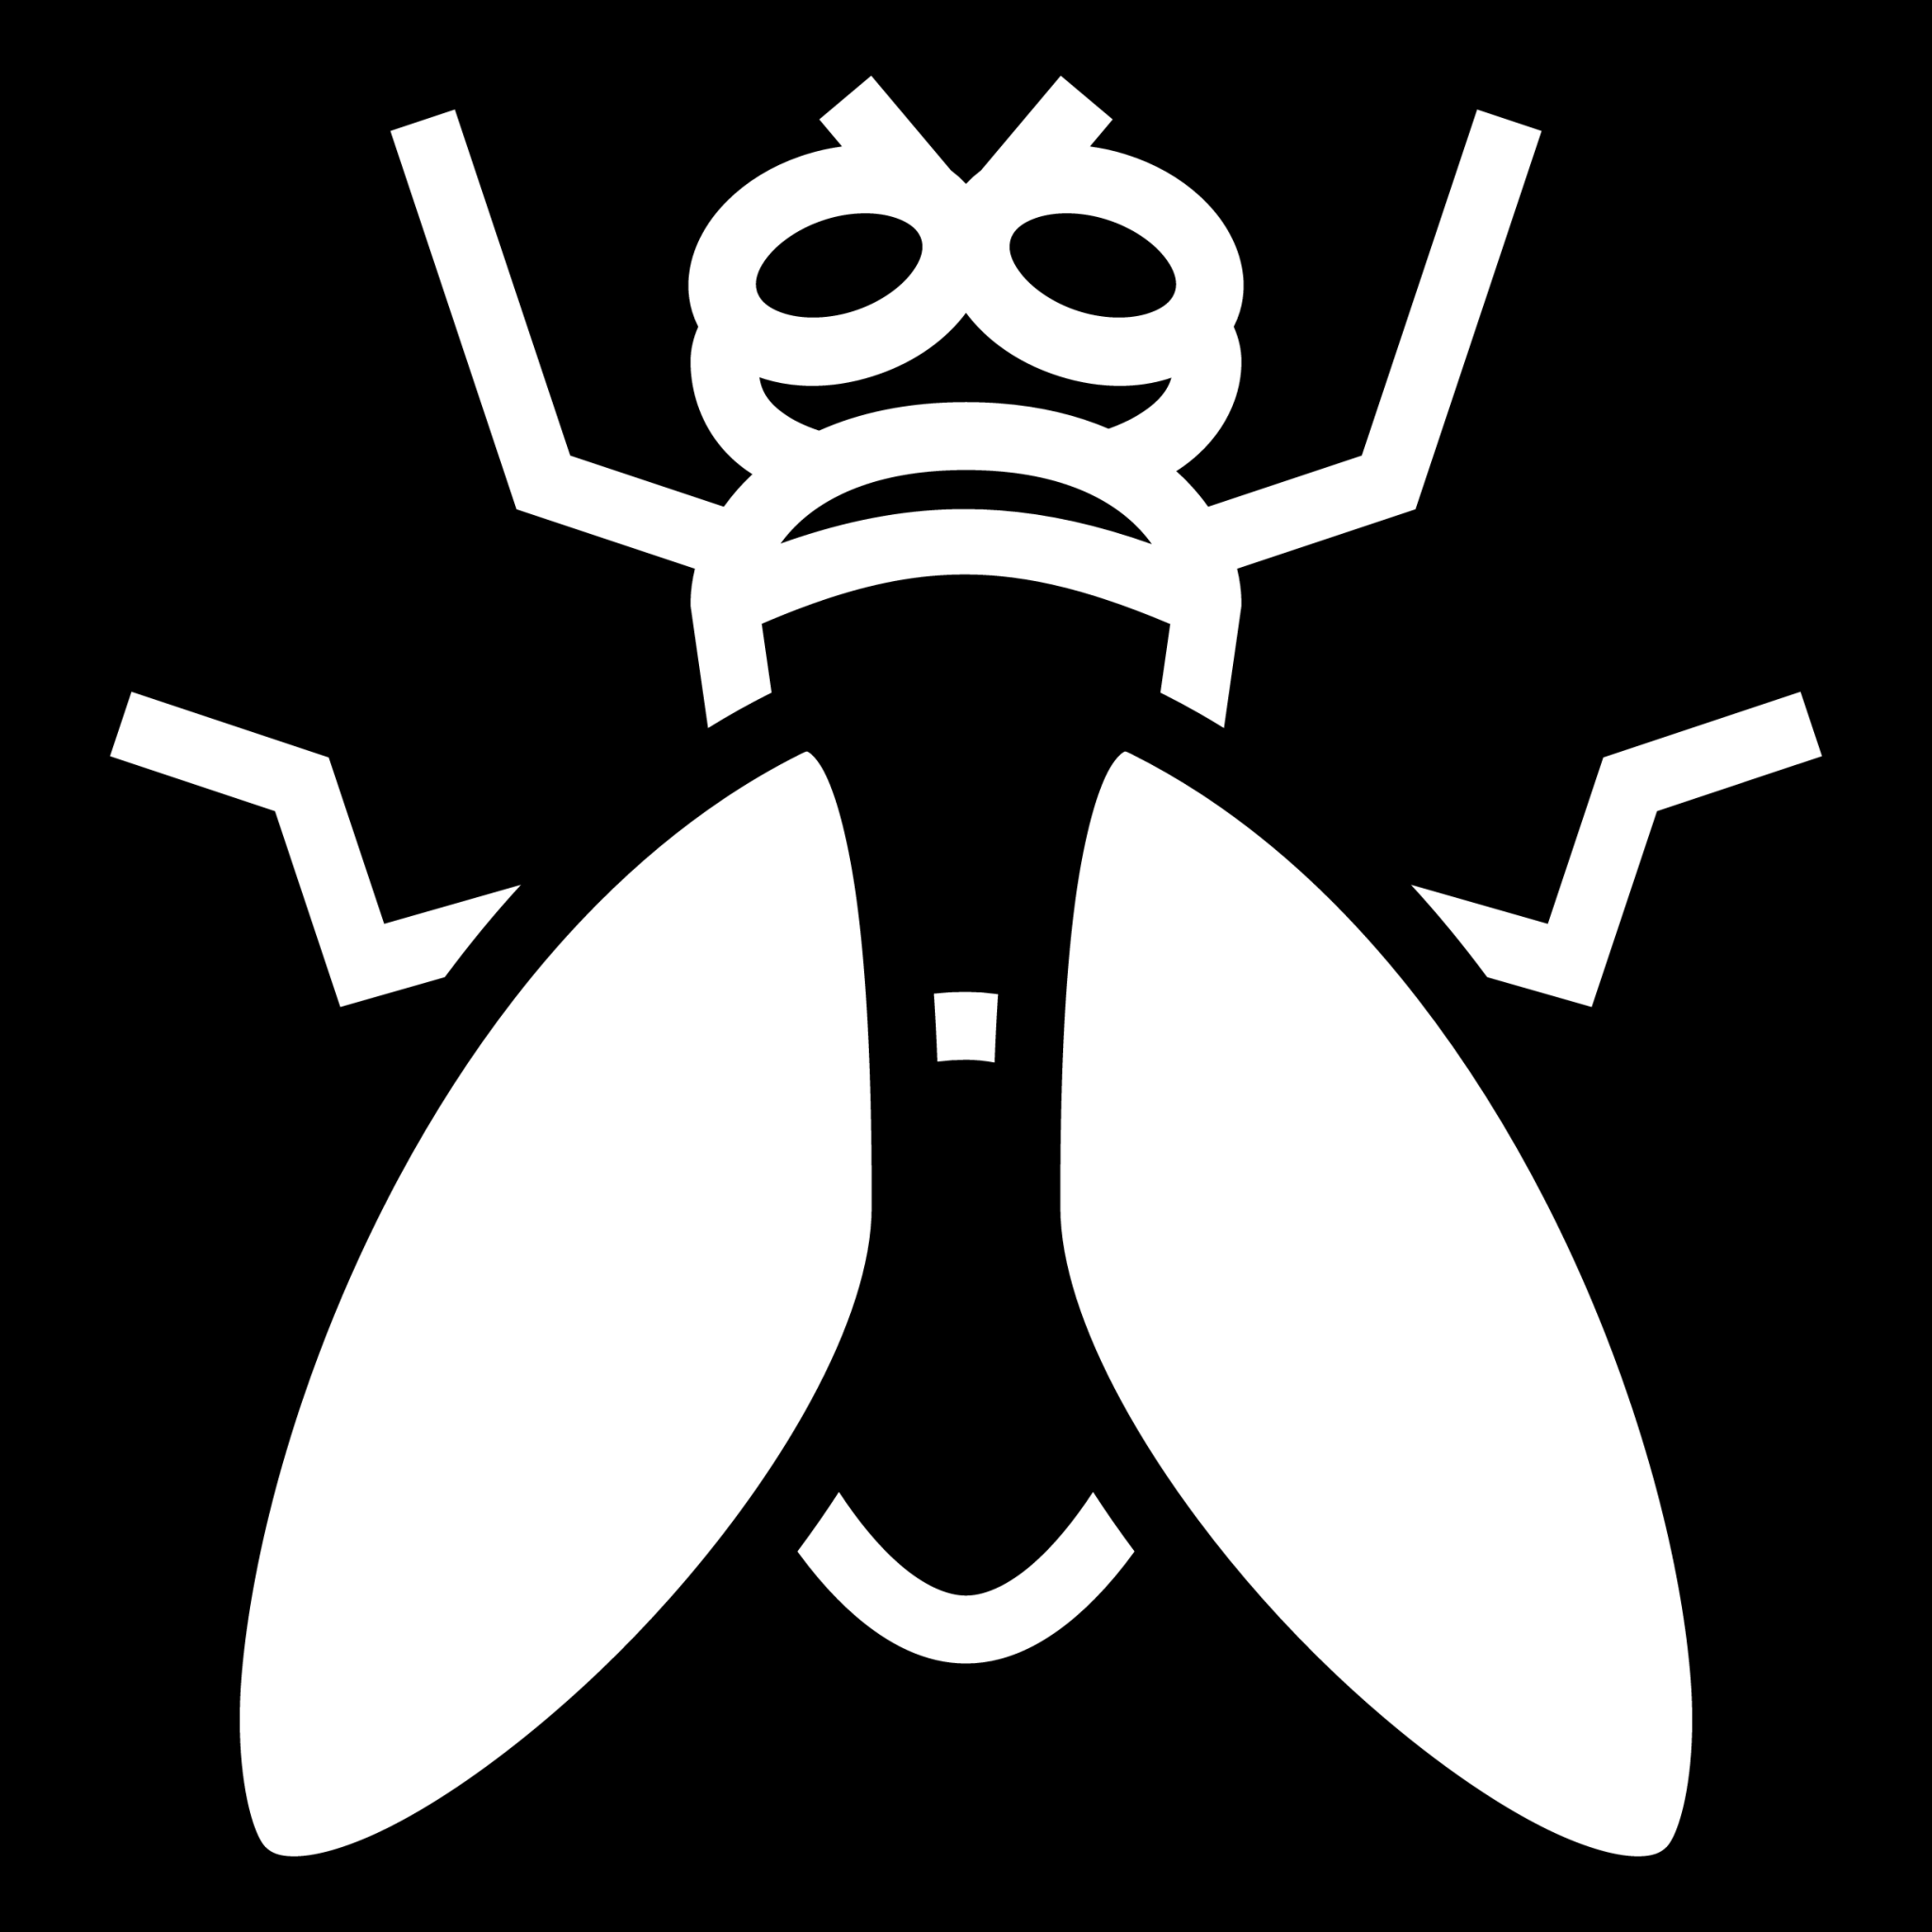 fly icon